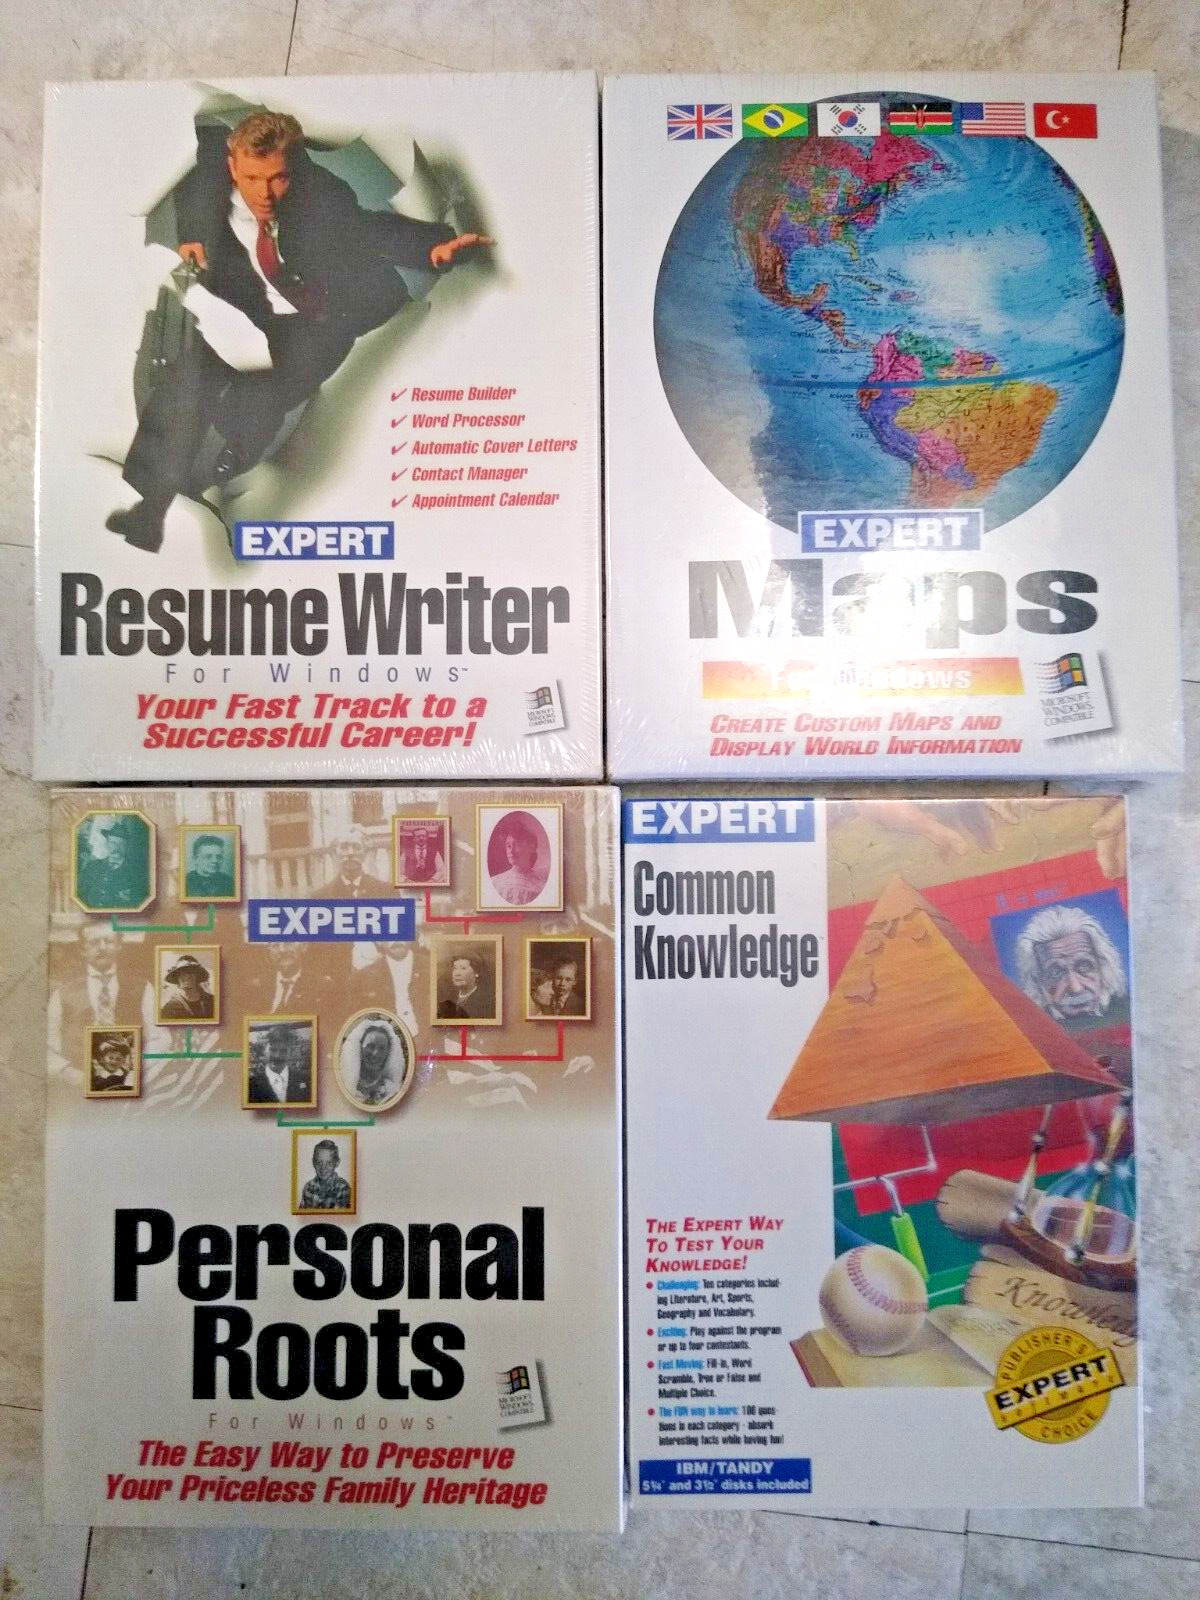 NEW 1992 EXPERT COMMON KNOWLEDGE,MAPS,ROOTS,RESUME IBM/TANDY DISKS SOFTWARE LOT